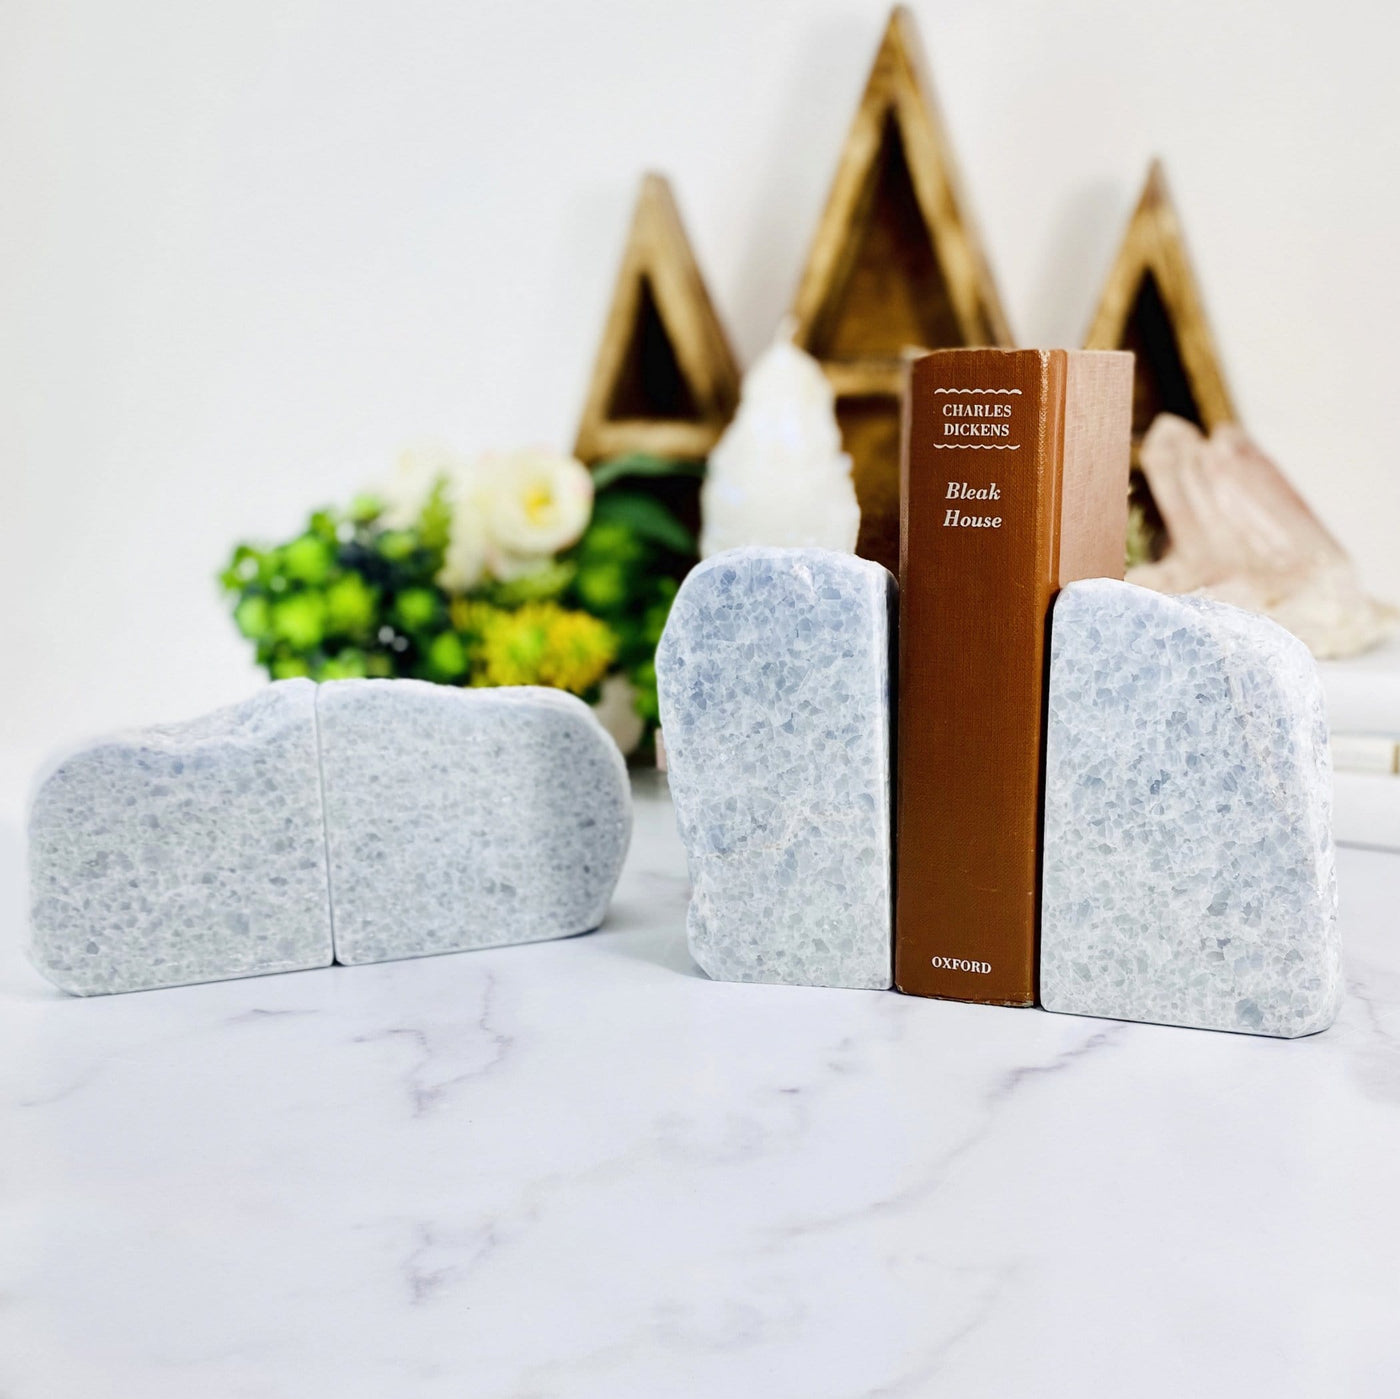 2 calcite book ends with a book and decorations blurred in the background